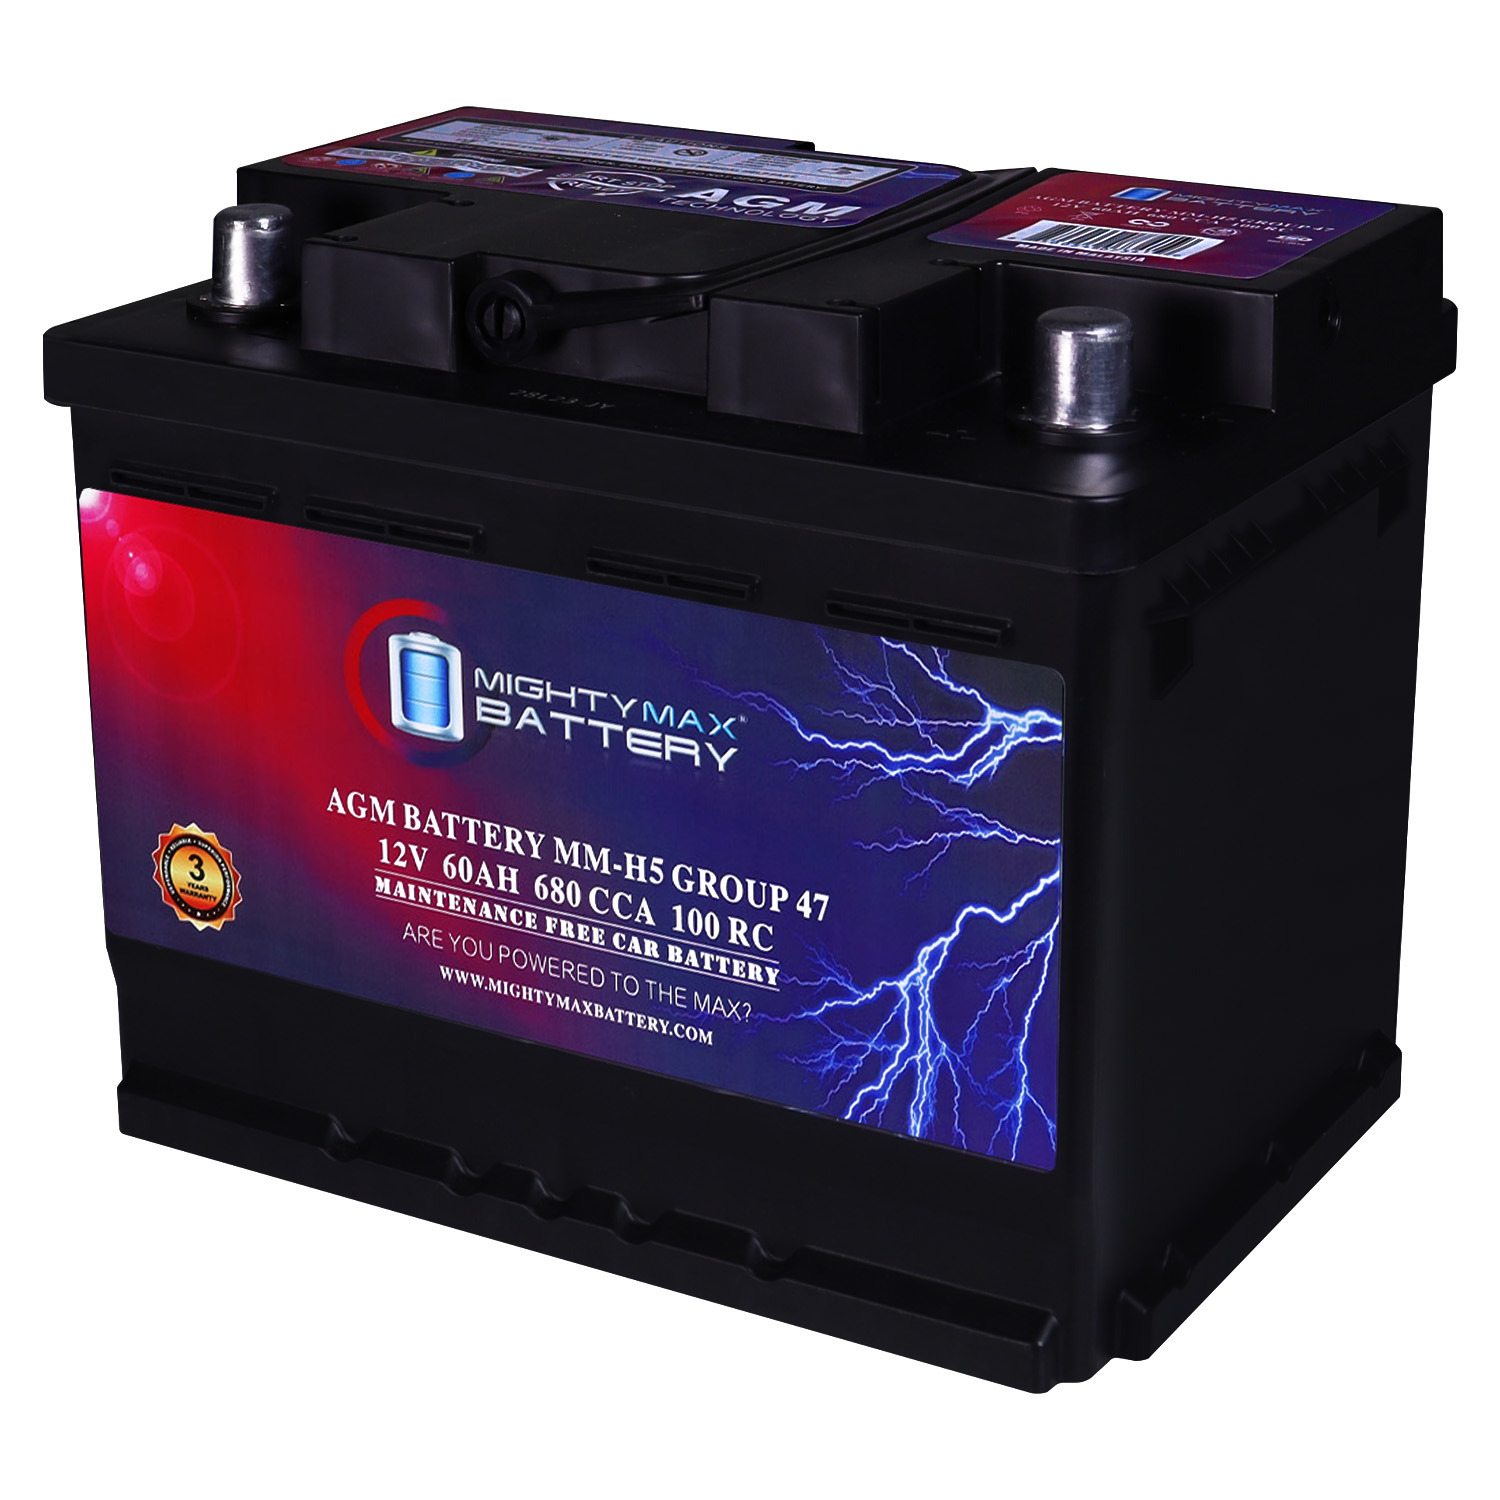 MM-H5 Group 47 12V 60AH 100RC 680CCA Replacement Battery Compatible with Bentley Flying Spur 14-18